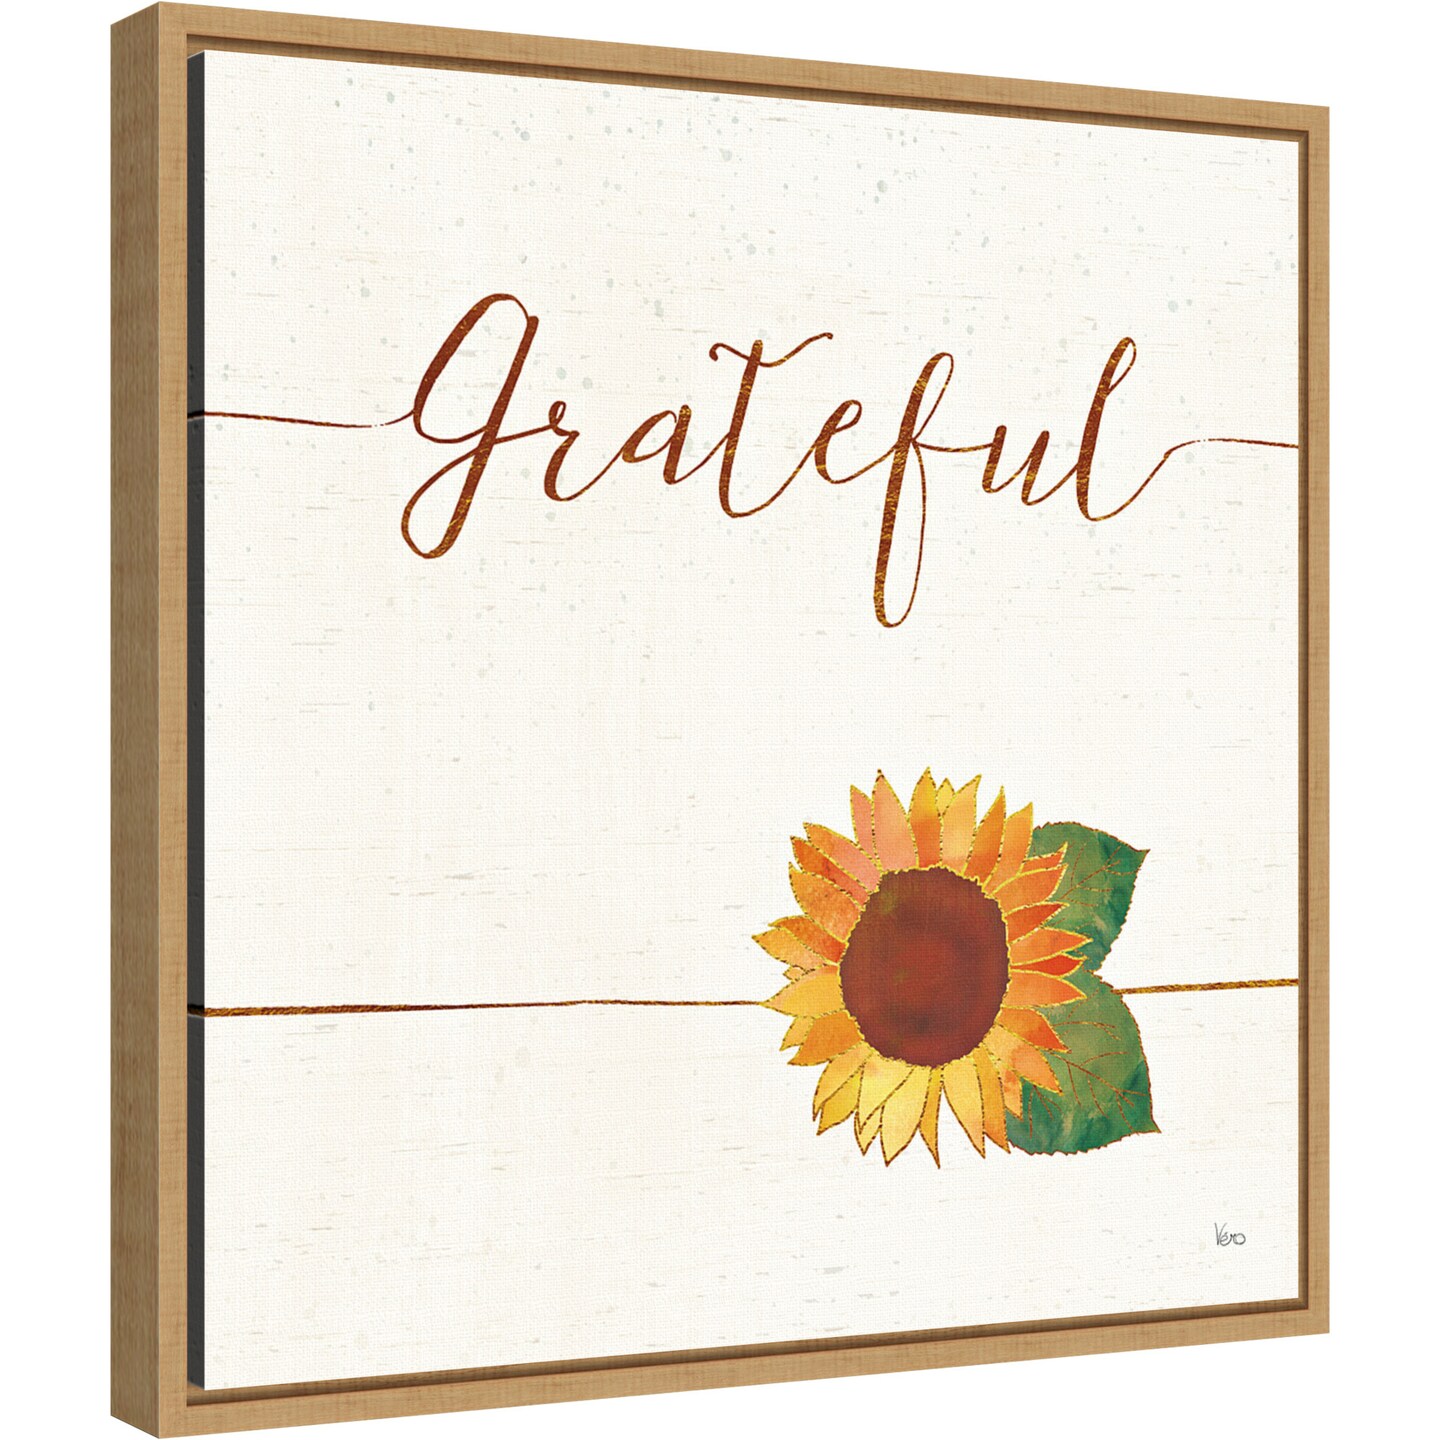 Grateful Fall Sunflower by Veronique Charron 16-in. W x 16-in. H. Canvas Wall Art Print Framed in Natural